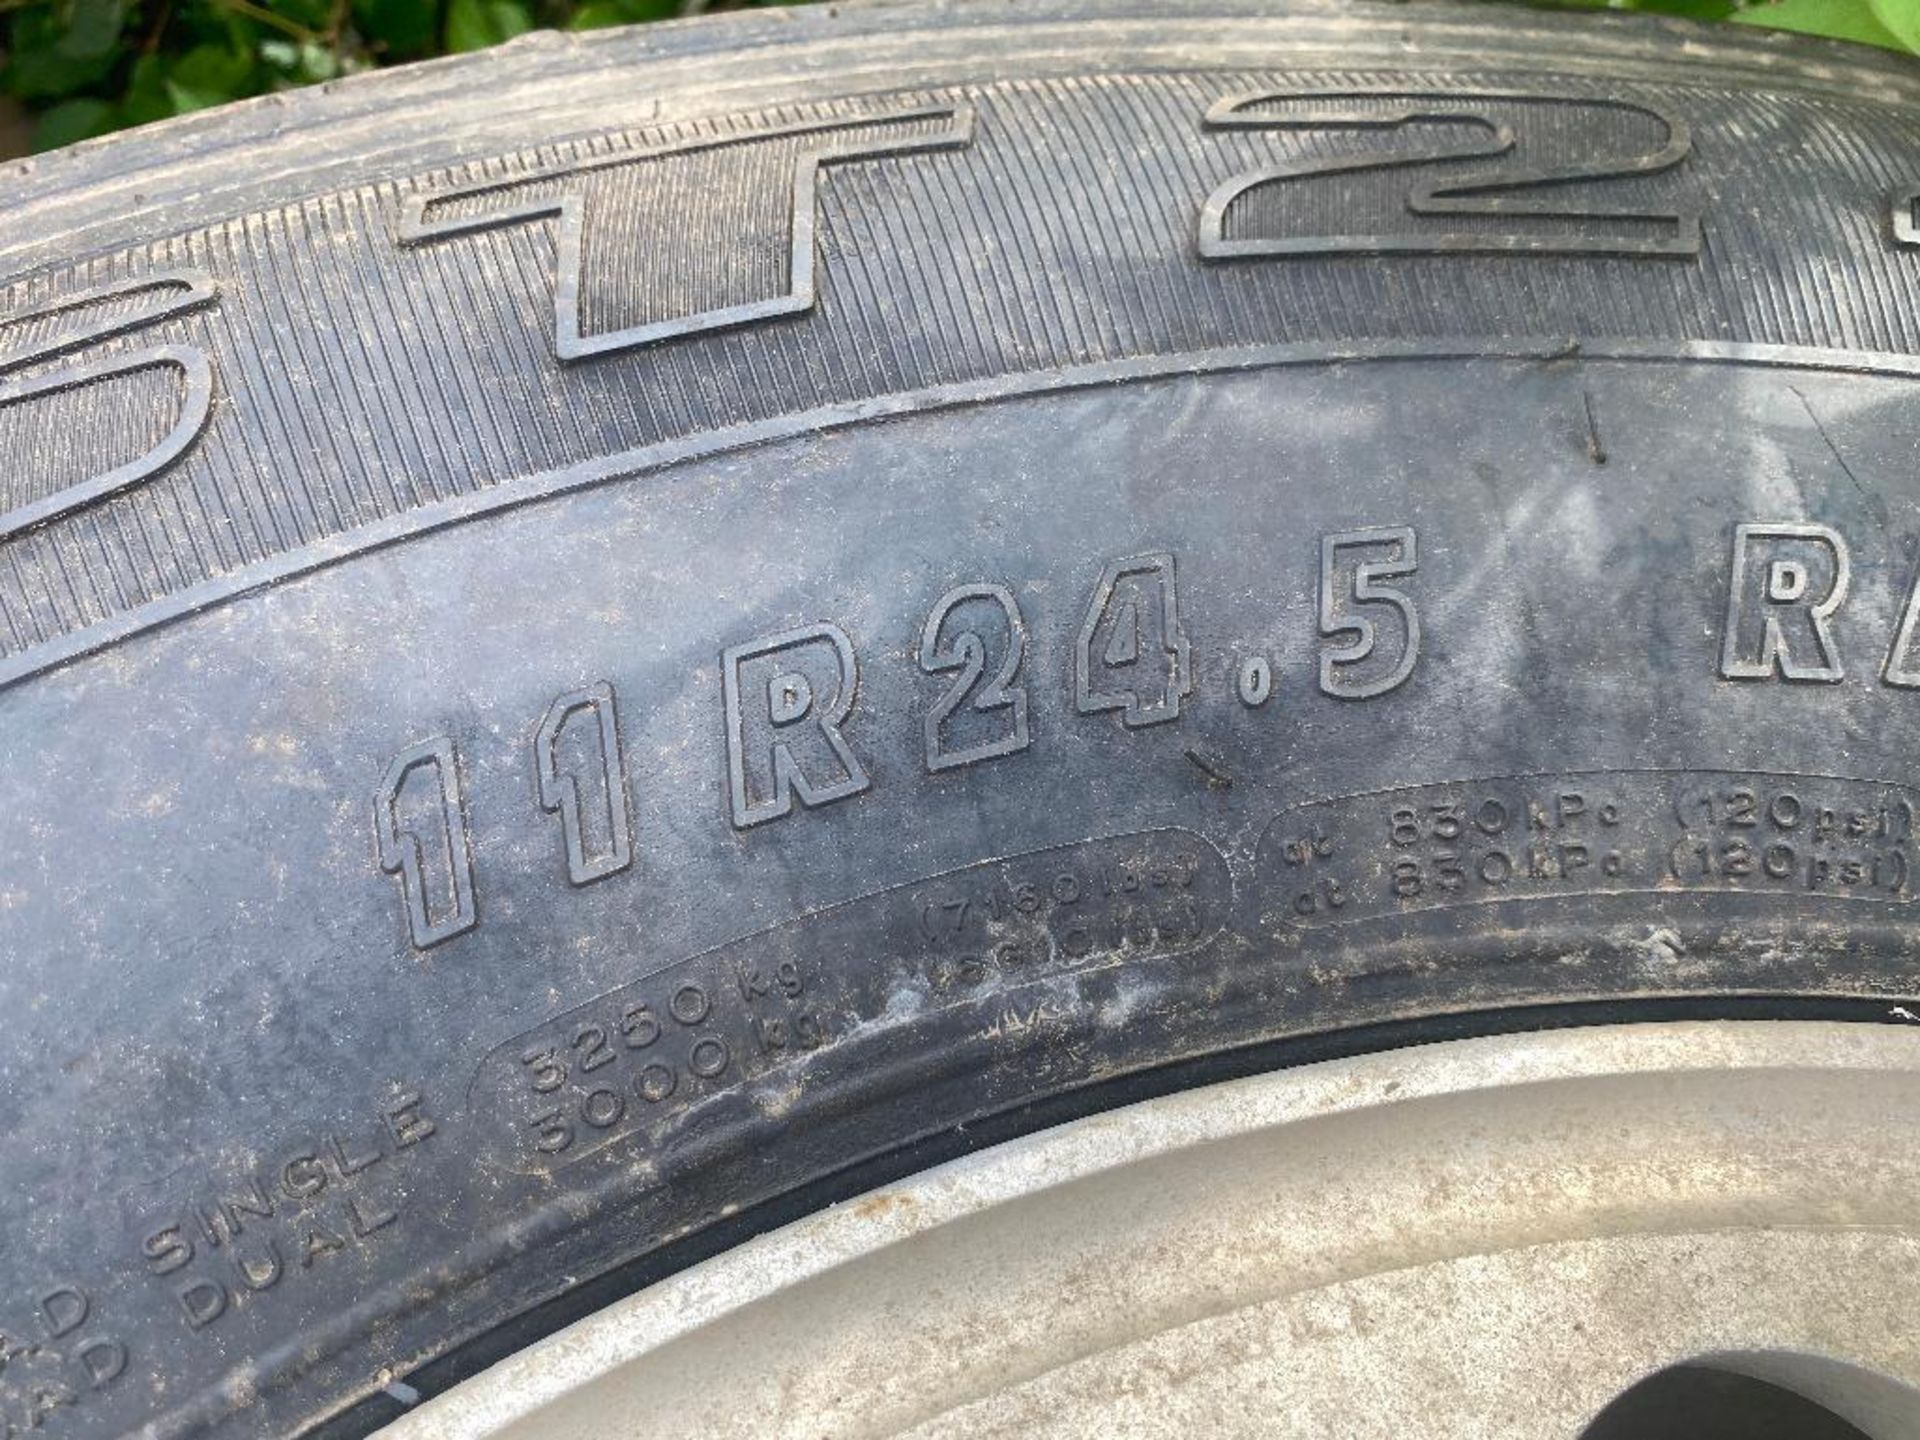 Lot of (2) 11R24.5 Tires - Image 5 of 5